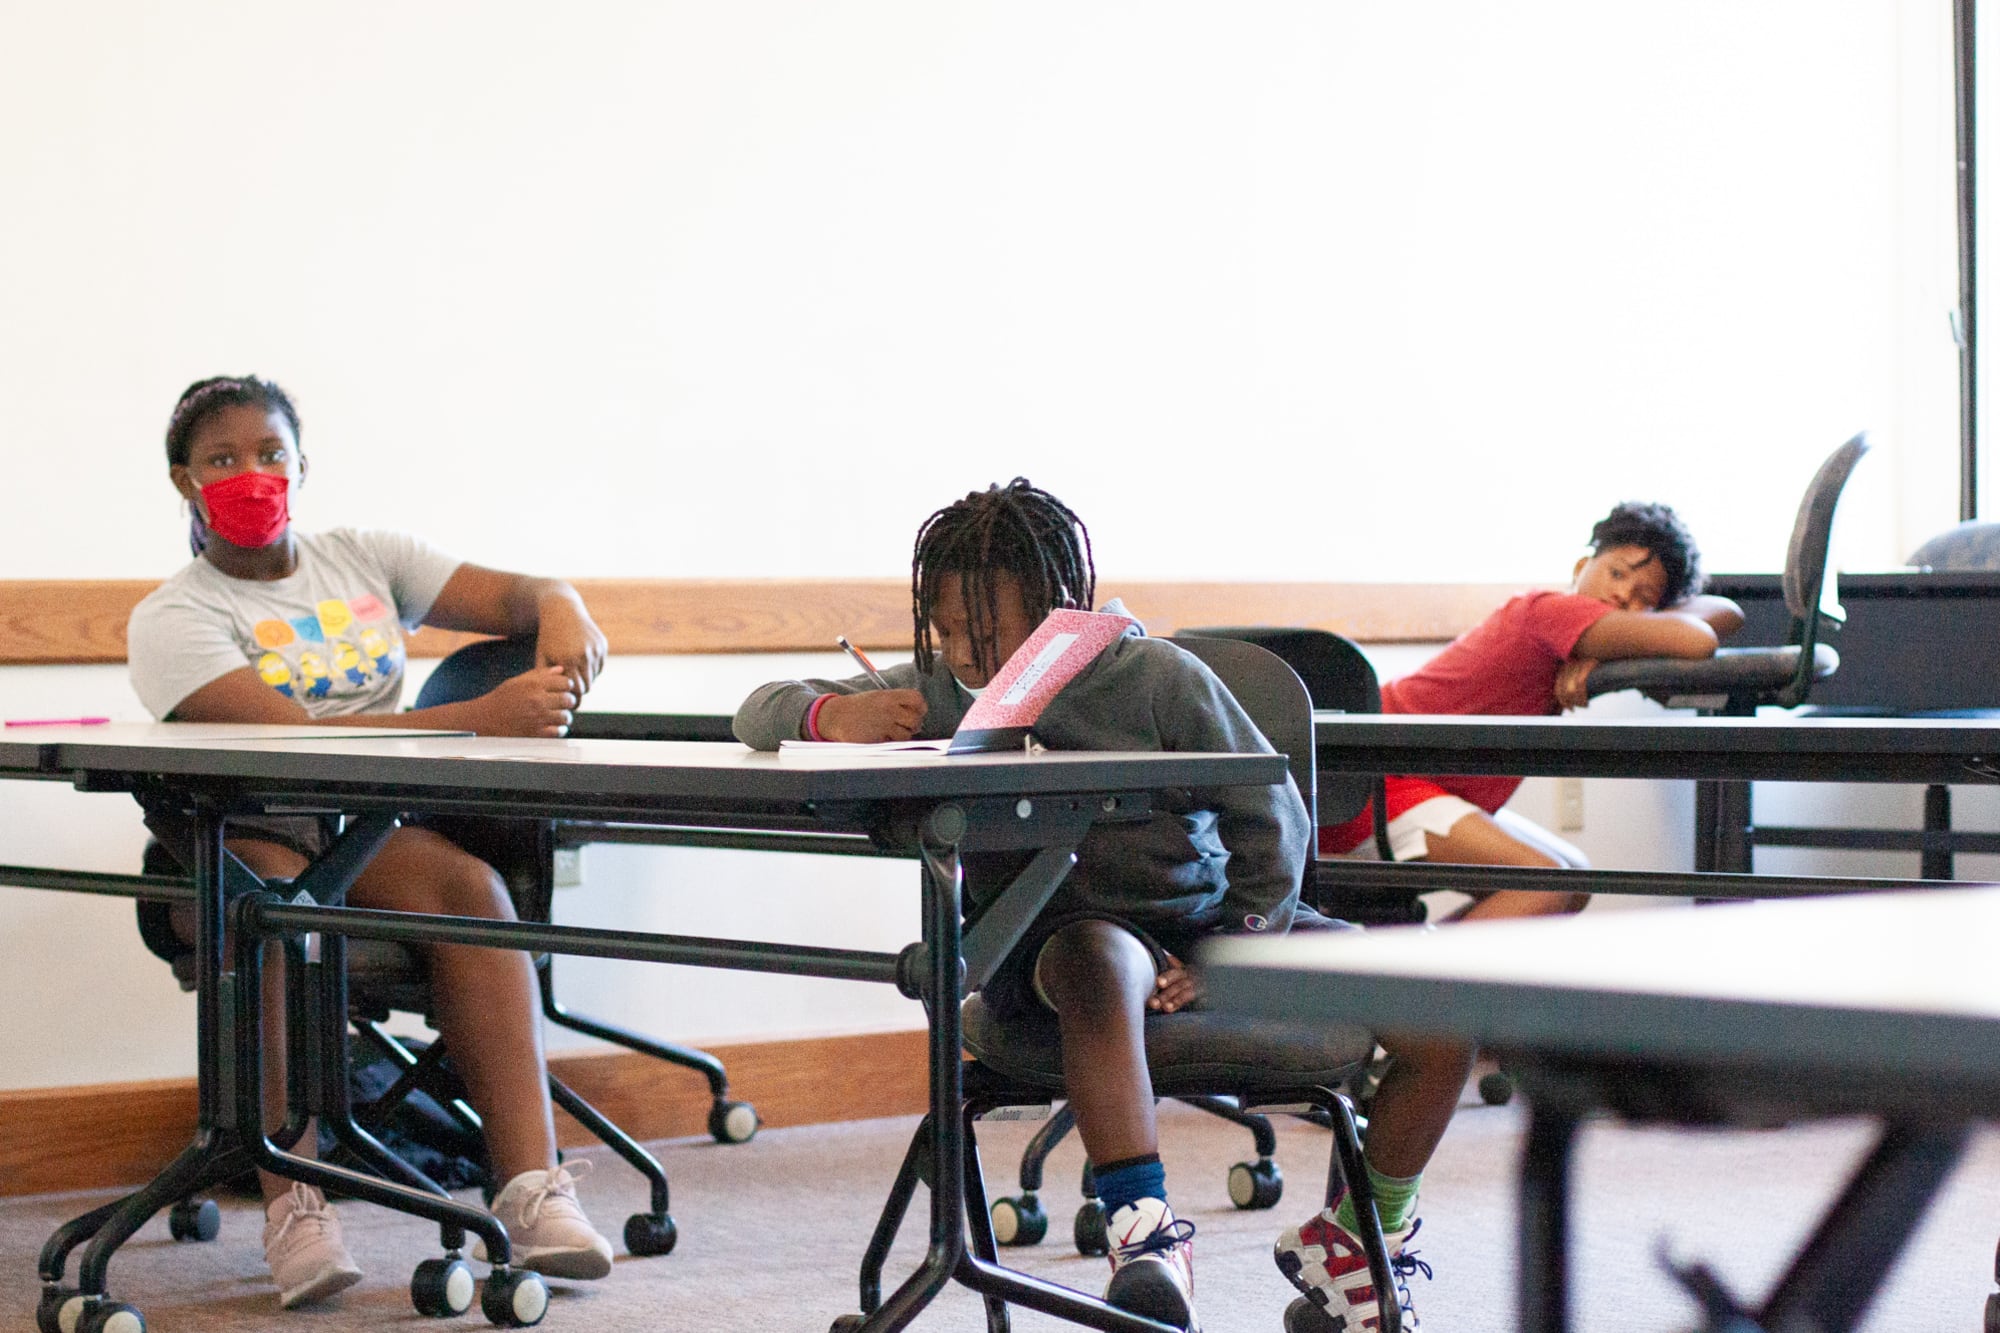 Three students sit at large desks in a classroom. The student in the center is taking notes in a red composition notebook, the student on the left is wearing a red mask and listening to a lecture as the student behind them leans on a raised chair and listens.